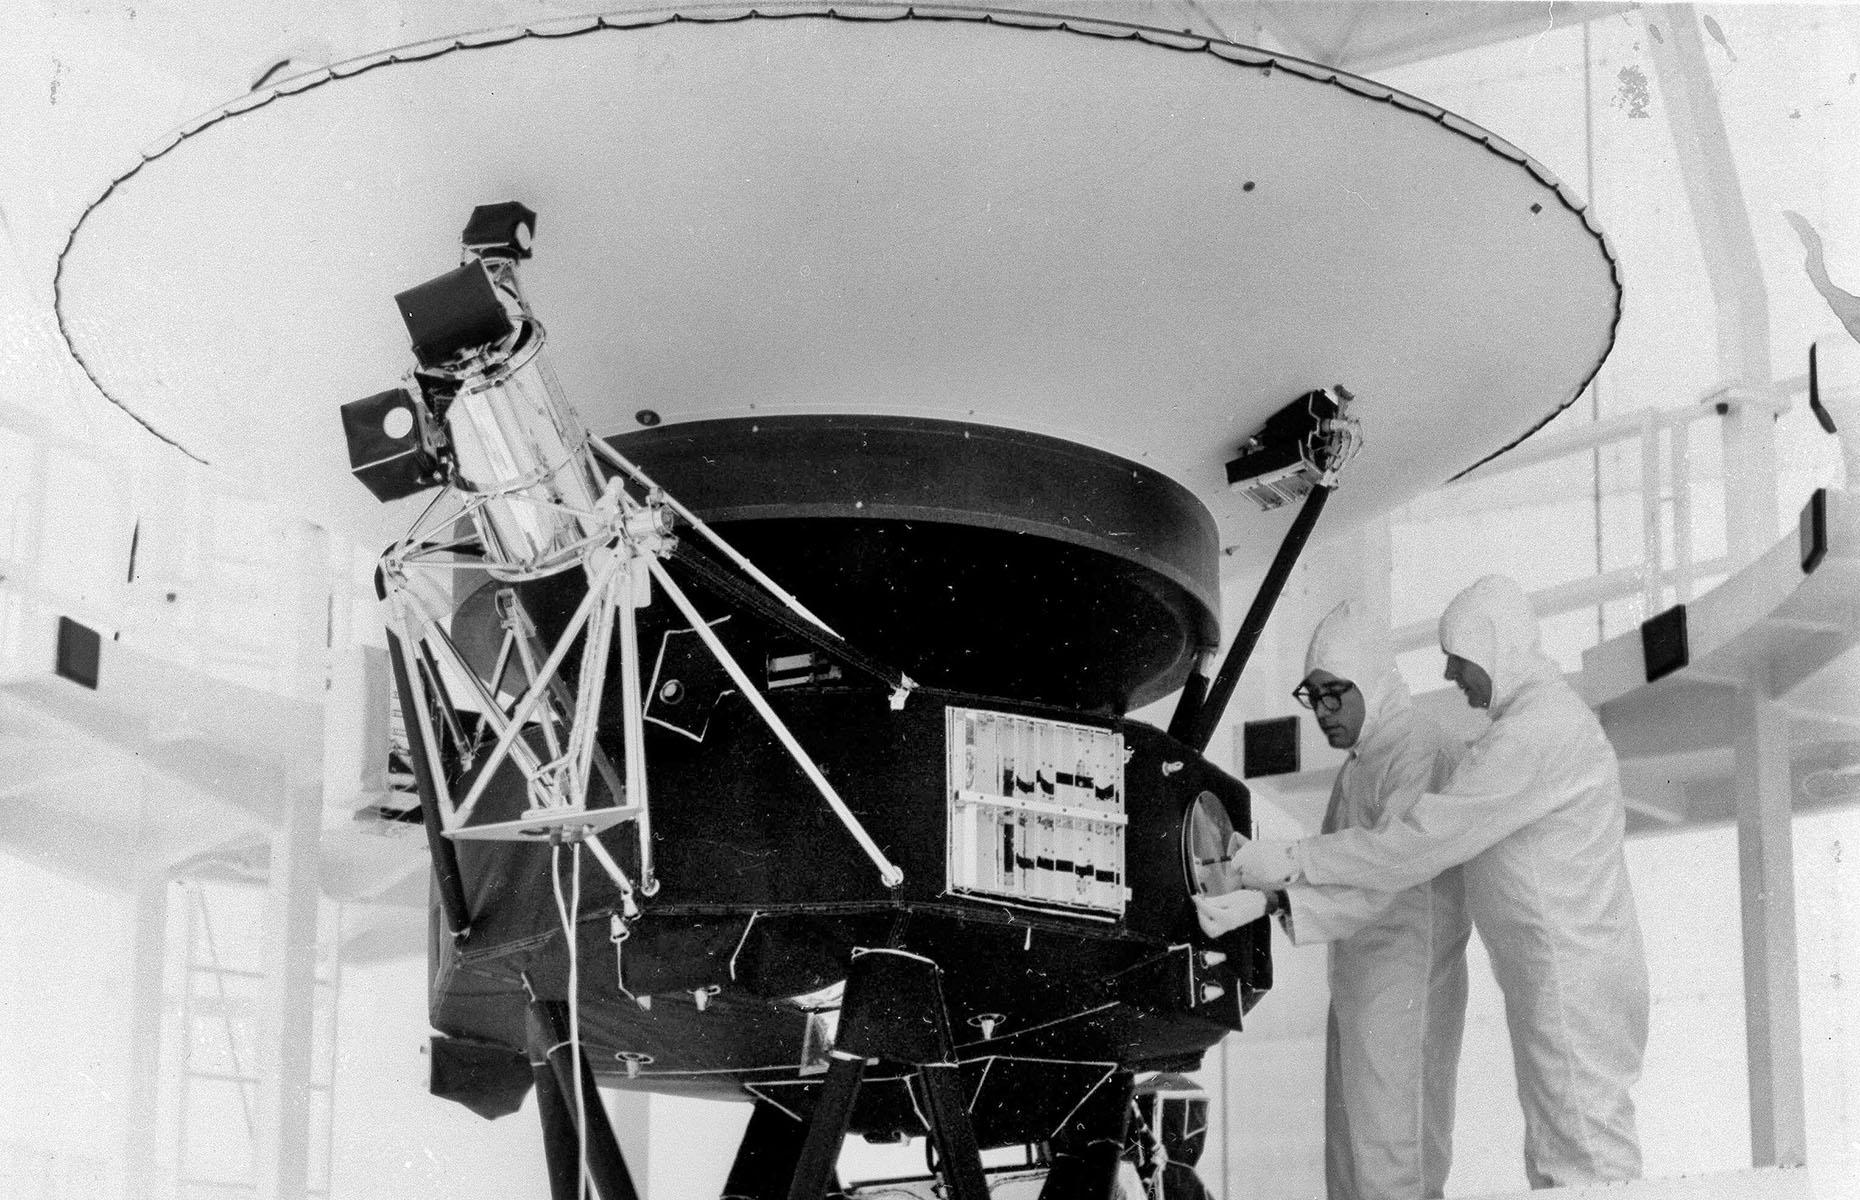 <p>Launched in 1977, 16 days before its twin Voyager 1, the Voyager 2 probe explored the outer planets of our solar system before crossing into interstellar space in 2018.</p>  <p>If it stays intact, the American craft will pass the stars Ross 248 and Sirius and is destined to roam interstellar space for infinity.</p>